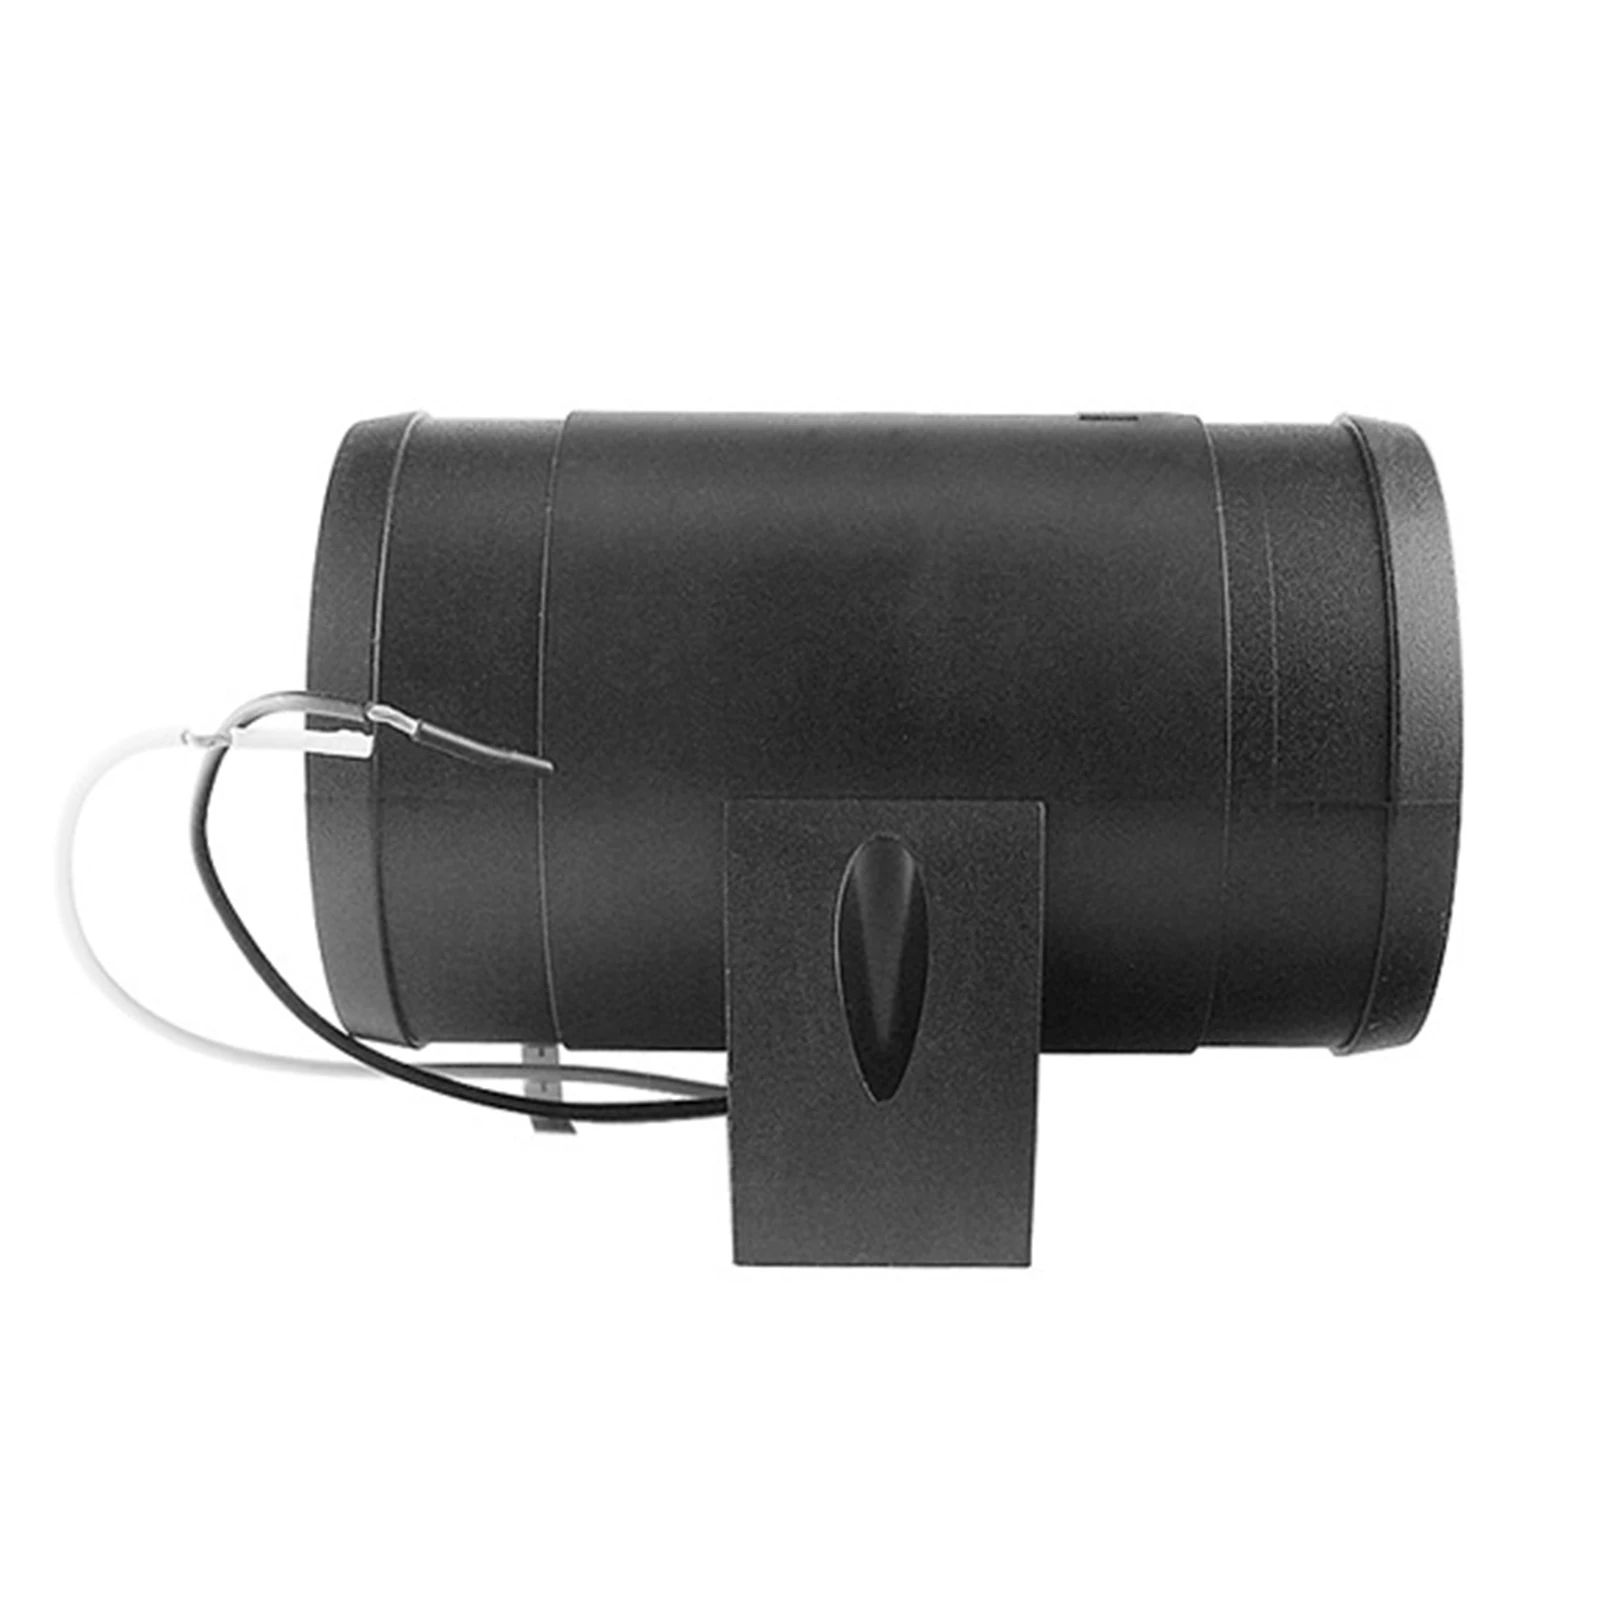 Marine Duct Fan 12V Bilge Blower Exhaust Fan 5-Blade Engine Room Fans Moisture-Protective Easy To Install Black Blower High industrial heat extraction ceiling ventilation fans solar powered high speed air conditioning attic big vent dc roof exhaust fan